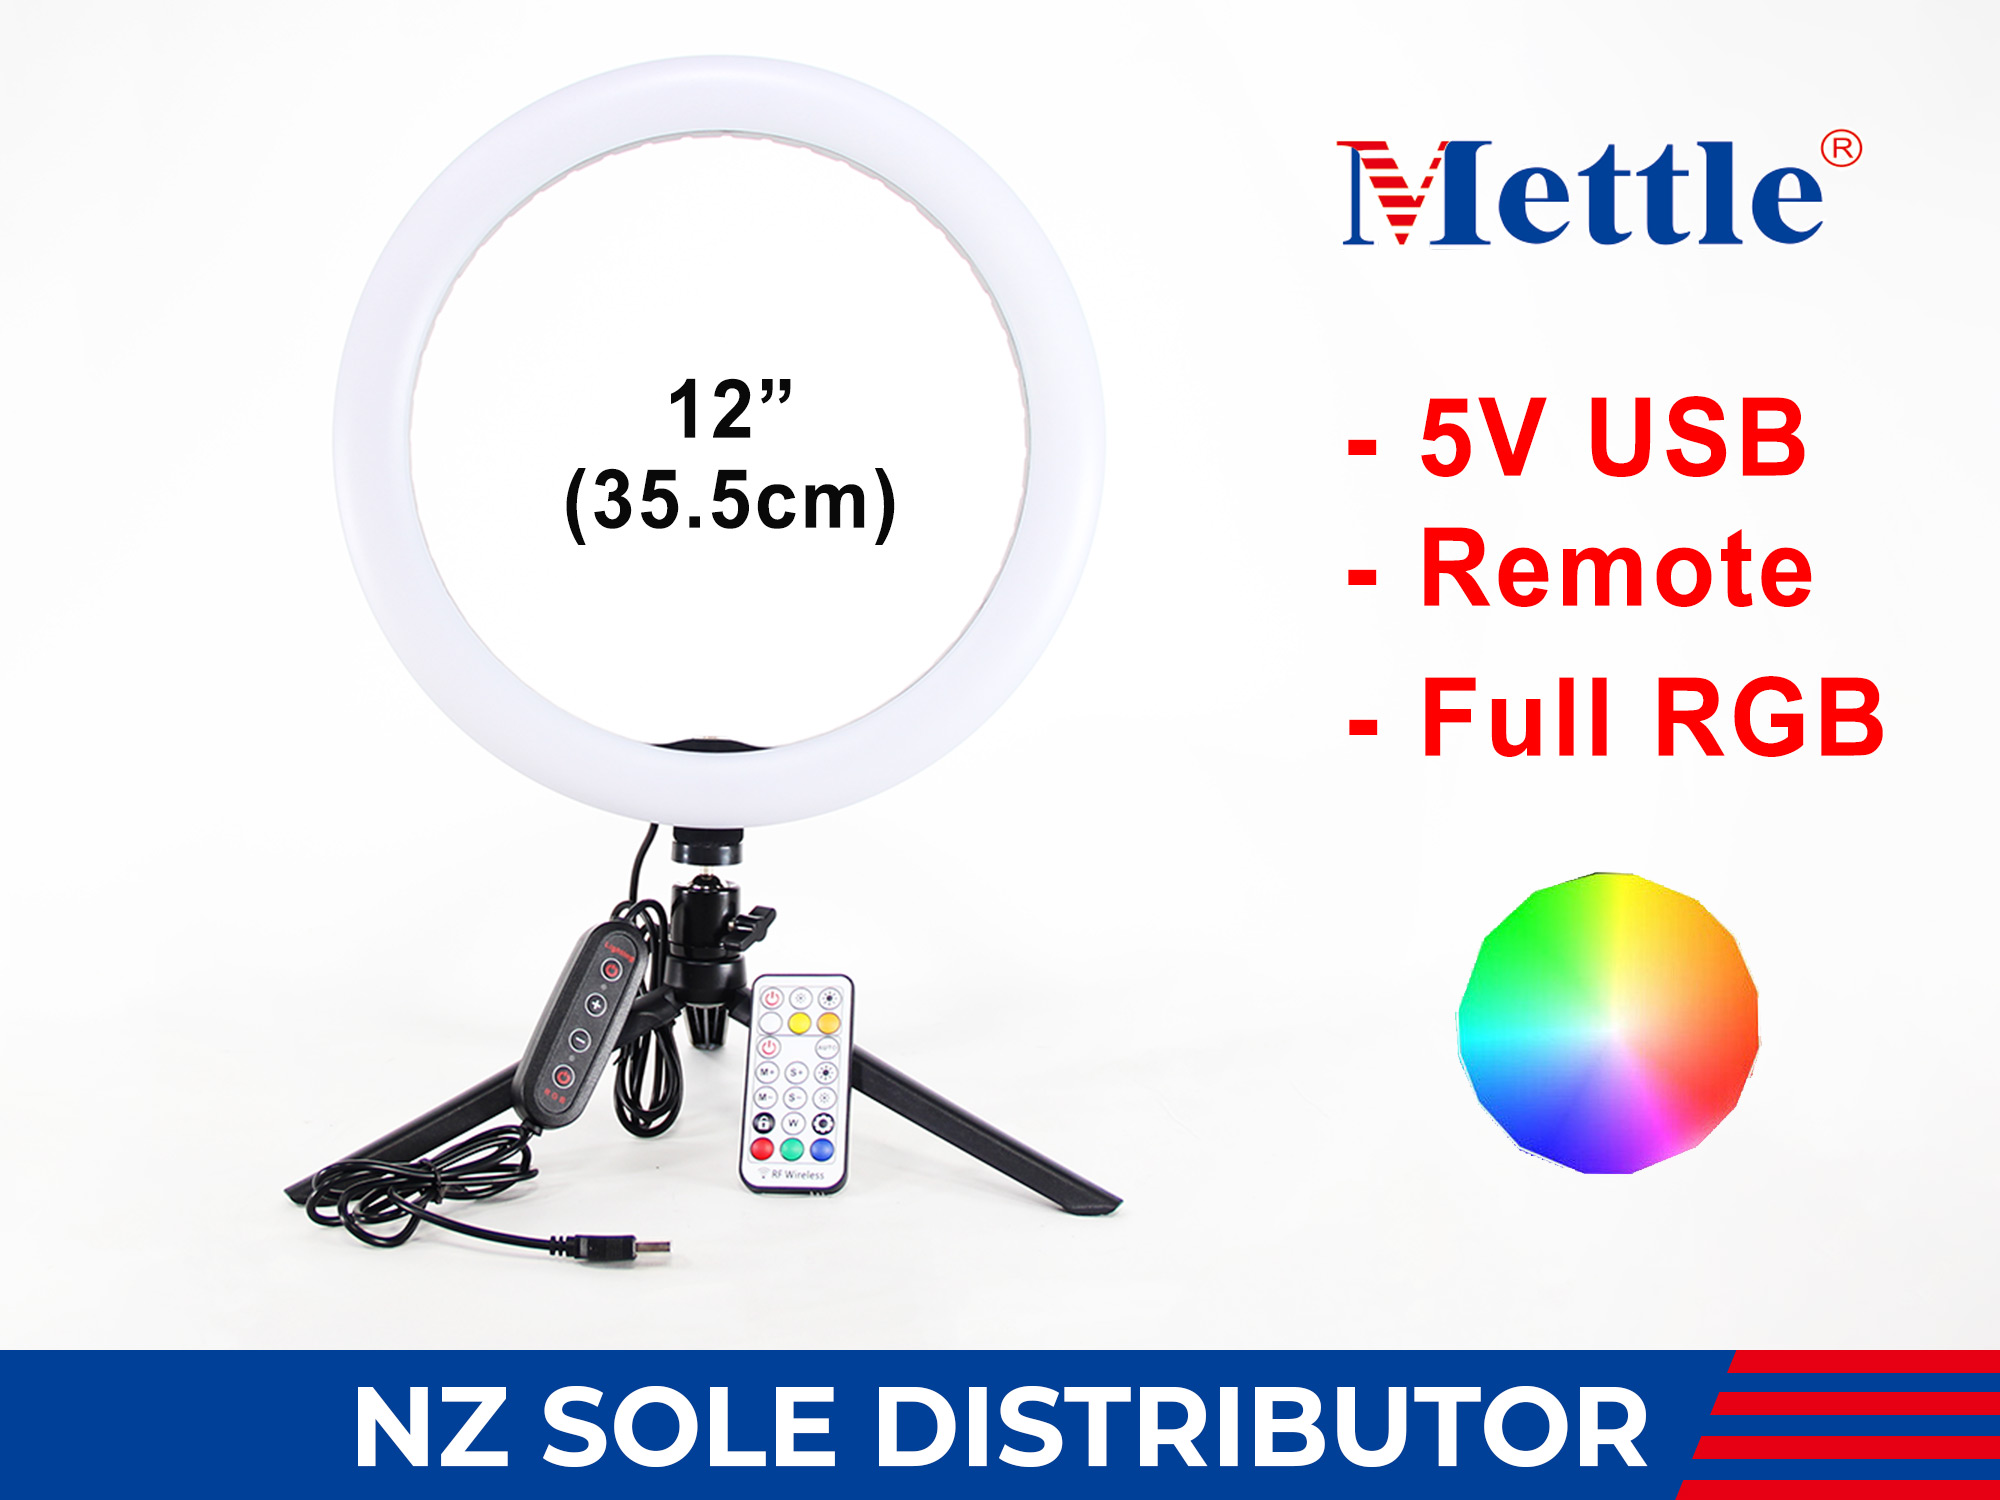 Mettle RGB LED 12" ring light + remote, Tripod, and flexible phone holder